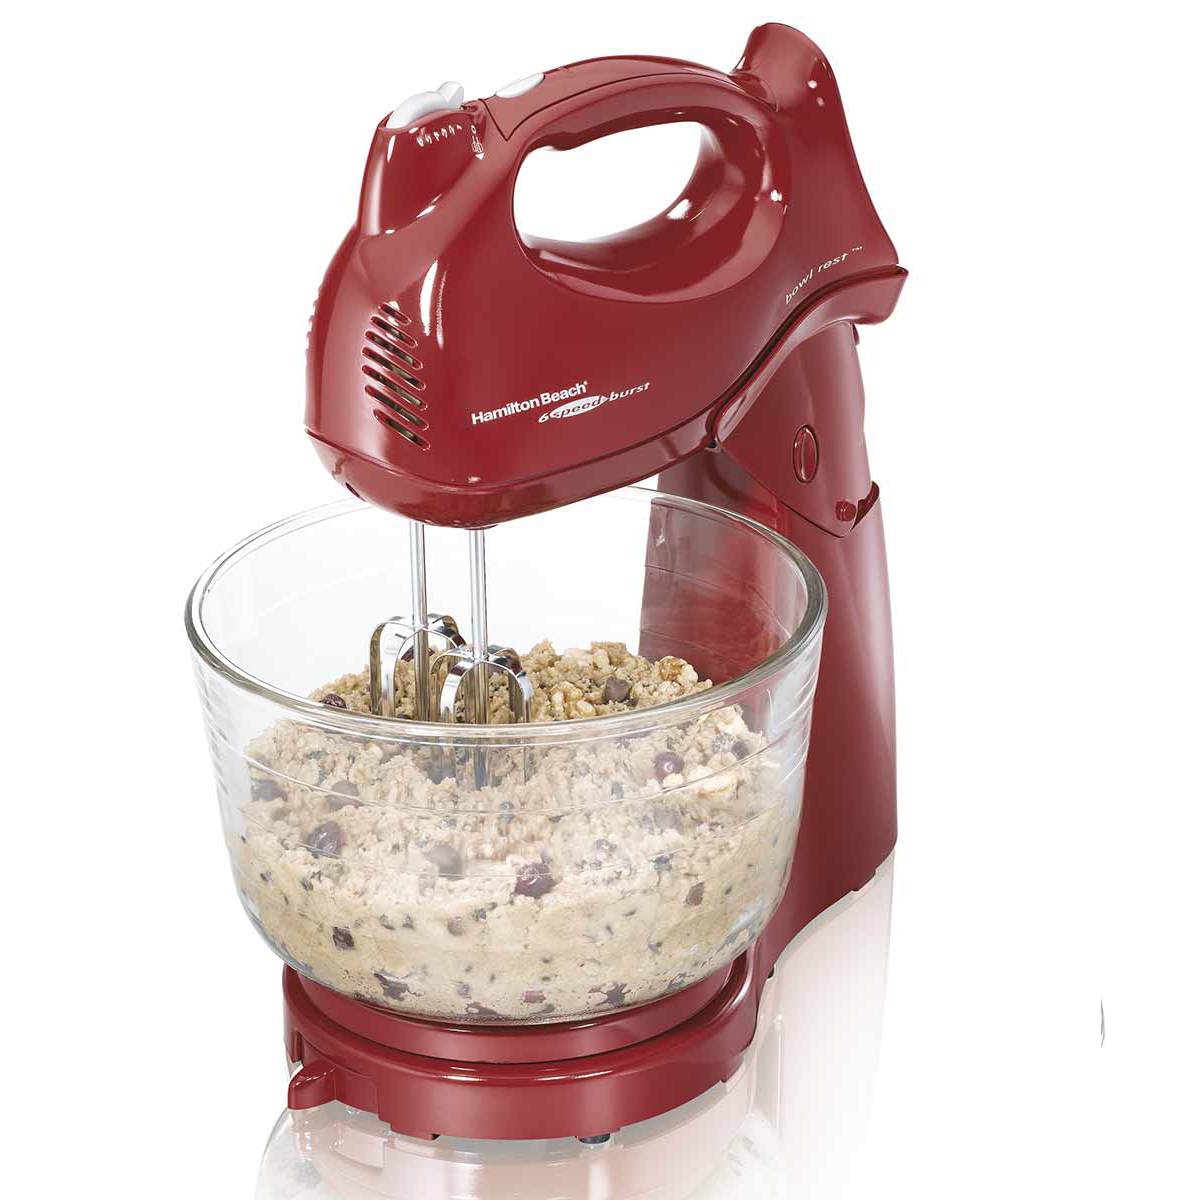 New Hamilton Beach Deluxe 4 Quart Hand Stand Mixer Electric Power 6 Speeds Red 